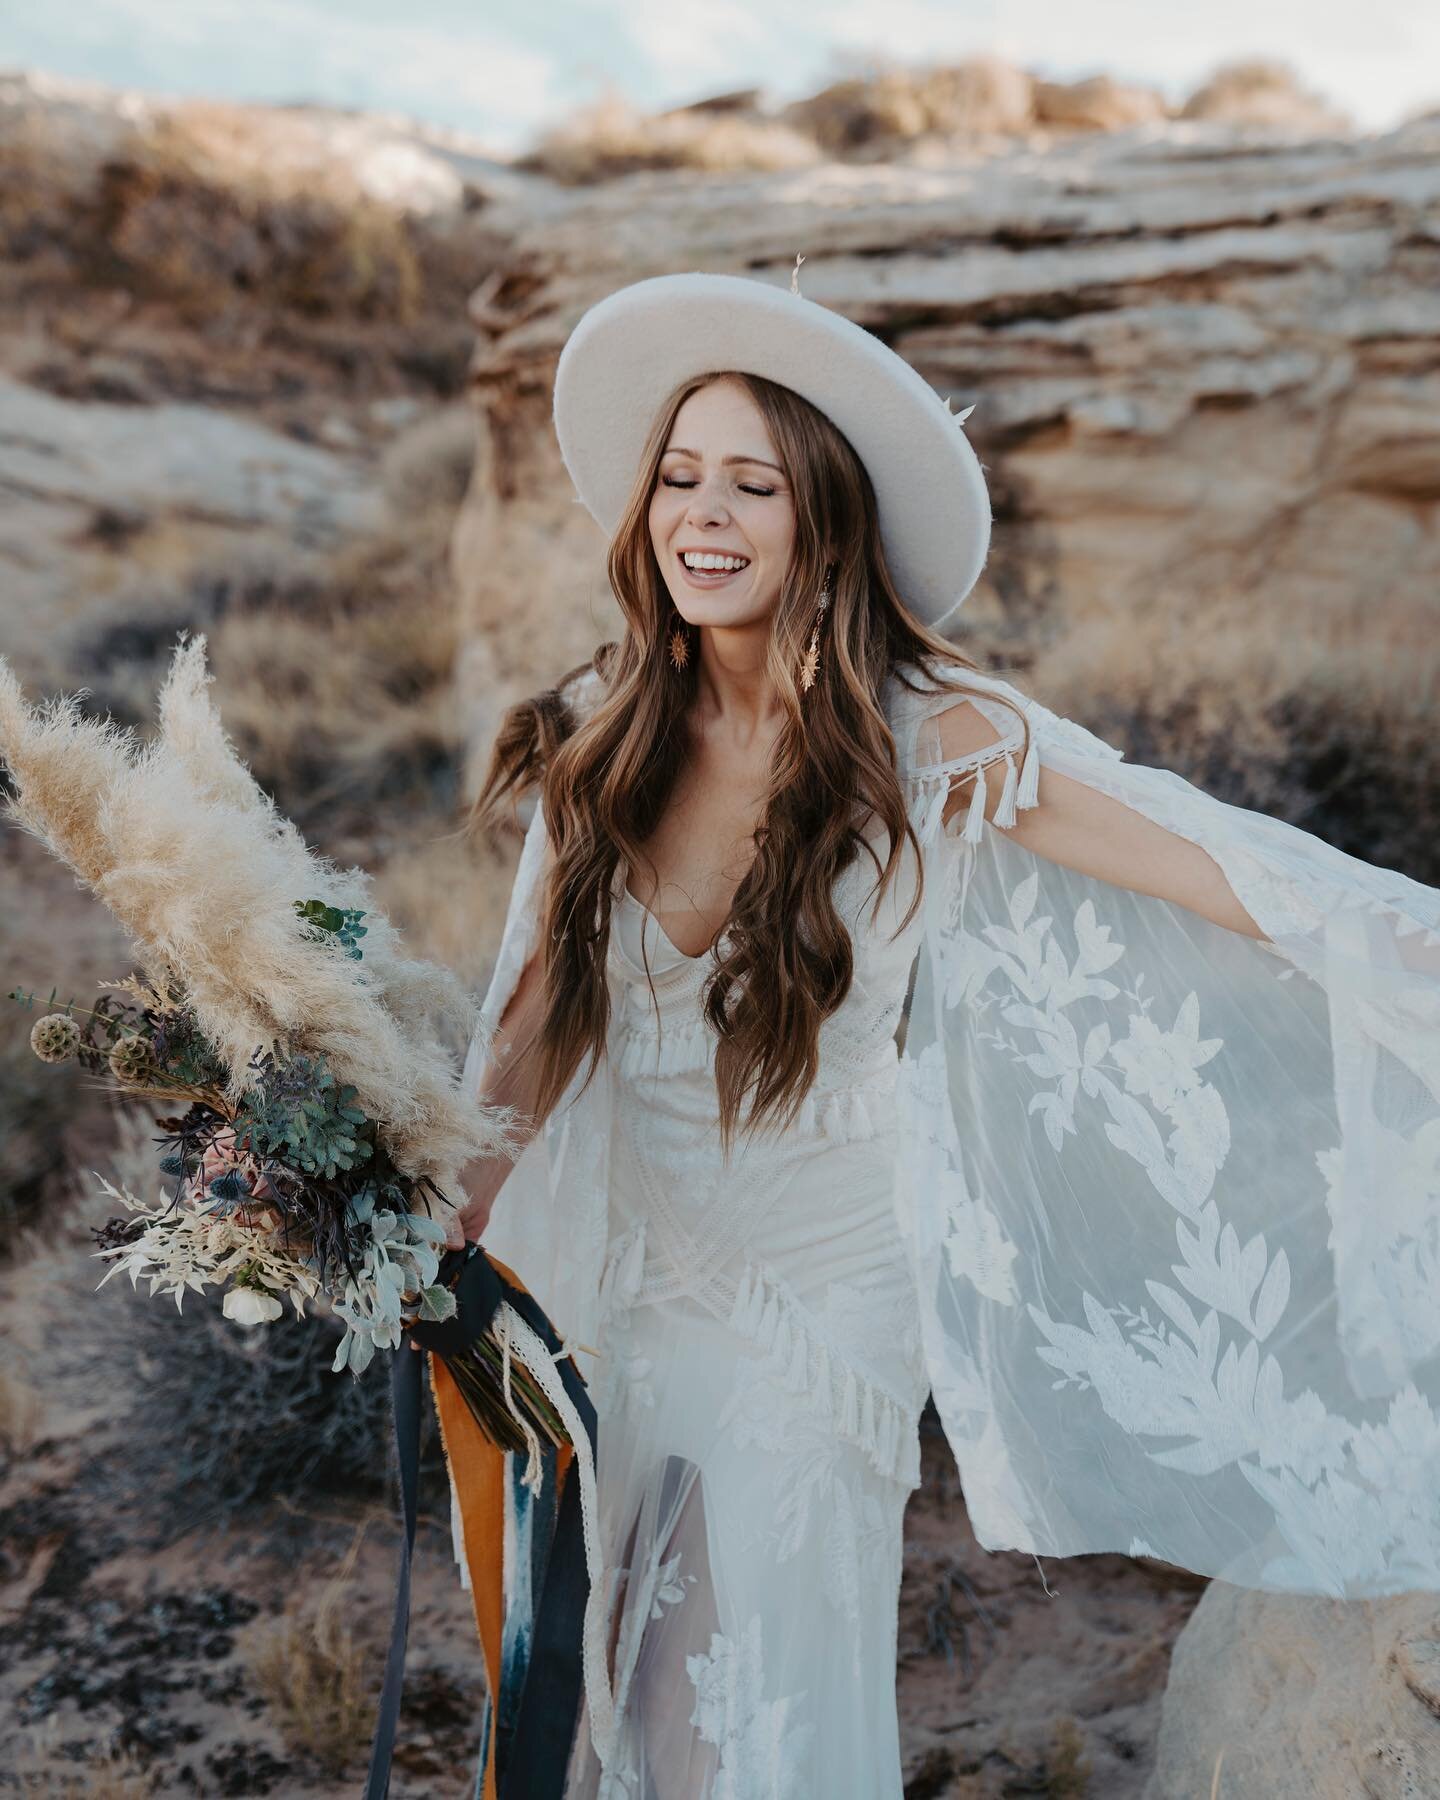 Can I just say this look was EVERYTHING🌟
.
.
.
Featured: @rockymtnbride 
Photography / Styling - @samraegenido
Planning: @rayanneroseweddings 
Florist - @newcreationsflowerco.sd 
Cake - @bleumoonbakery 
Furniture Rental - @akt_made 
Rentals Tablesca